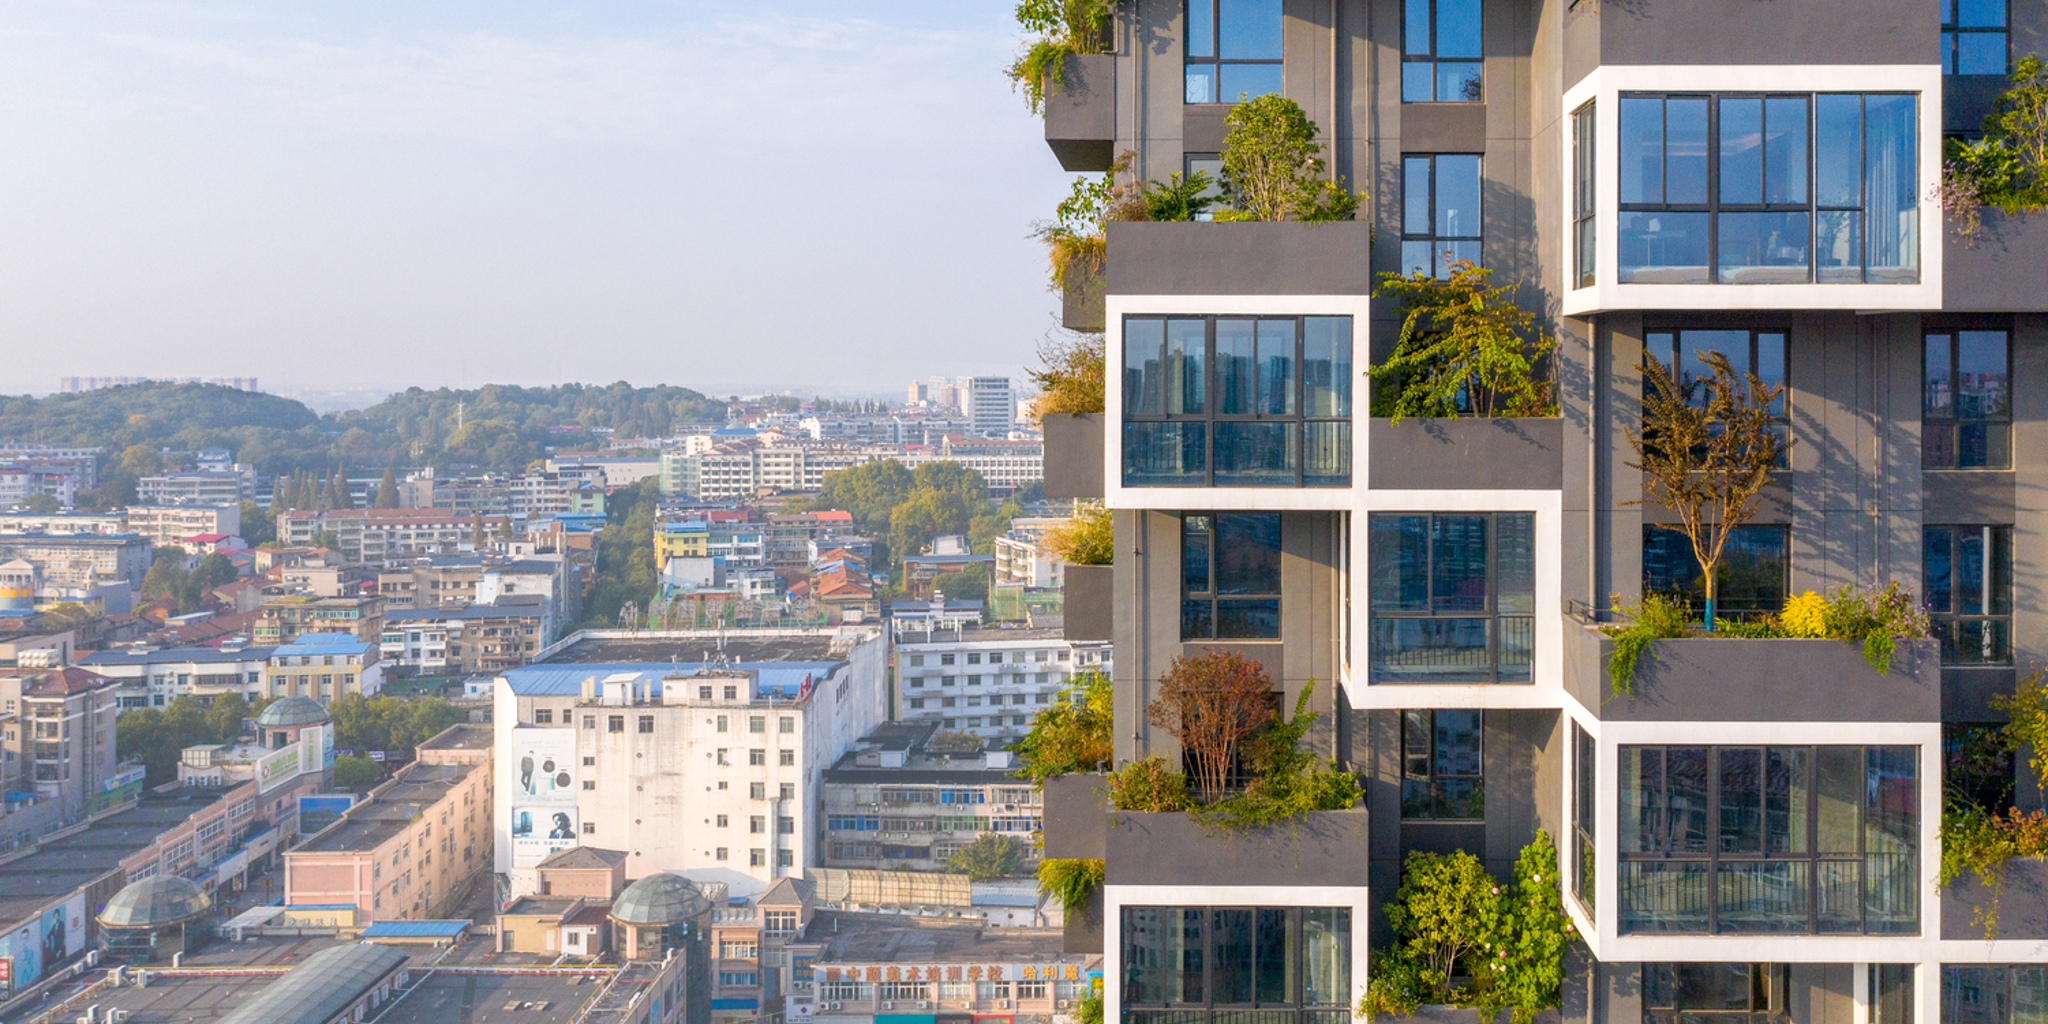 The countries with the most certified "green" buildings